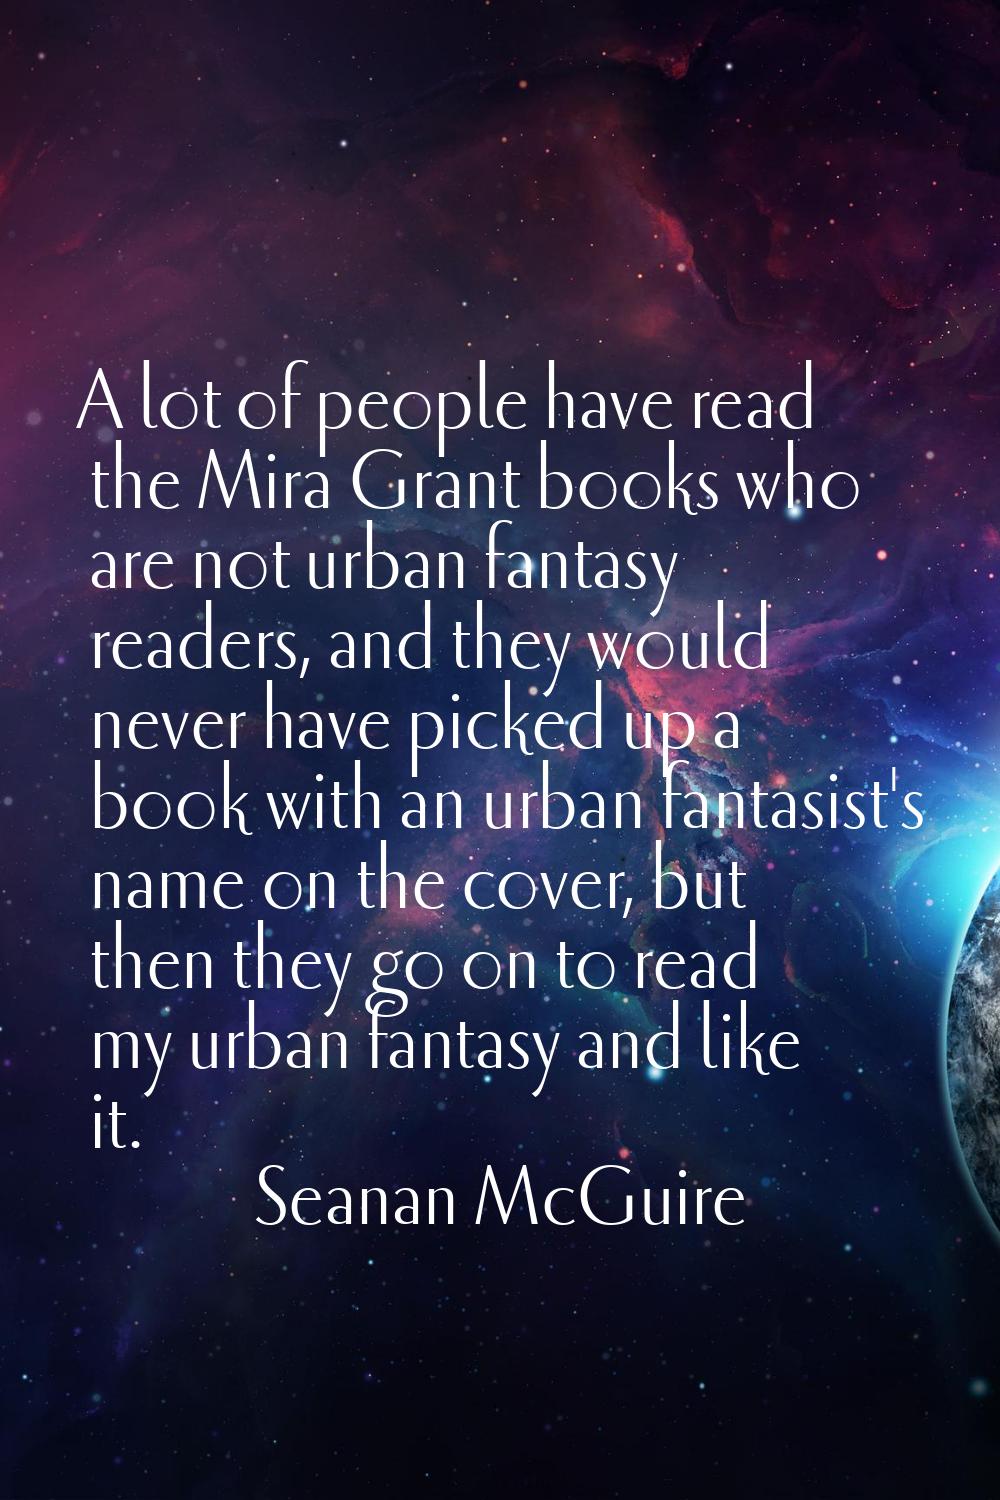 A lot of people have read the Mira Grant books who are not urban fantasy readers, and they would ne